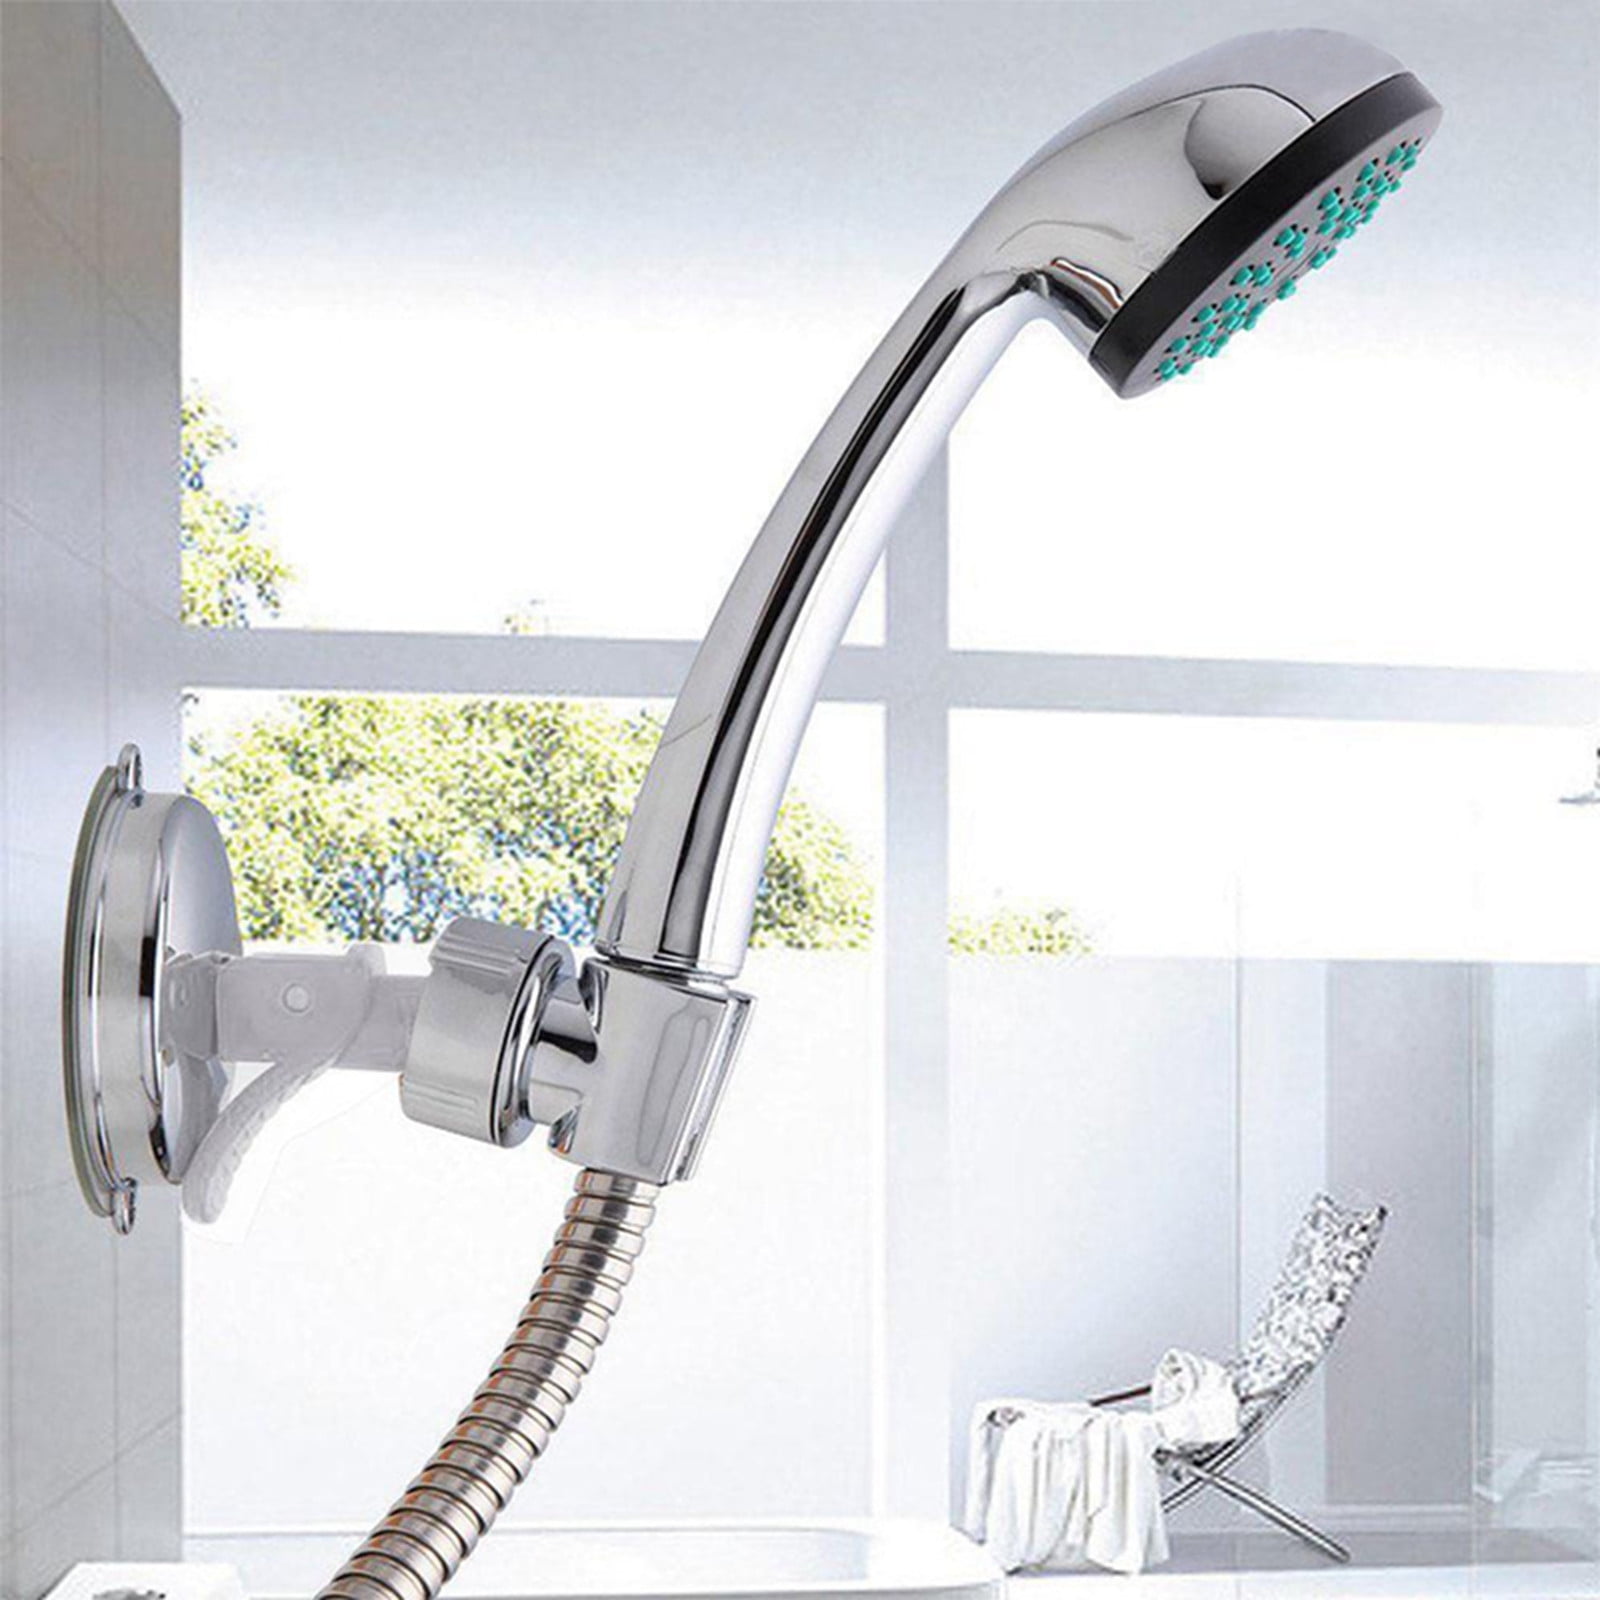 Bathroom Chrome Shower Head Handset Holder Strong Adhesive Wall Mount Drill Fix 